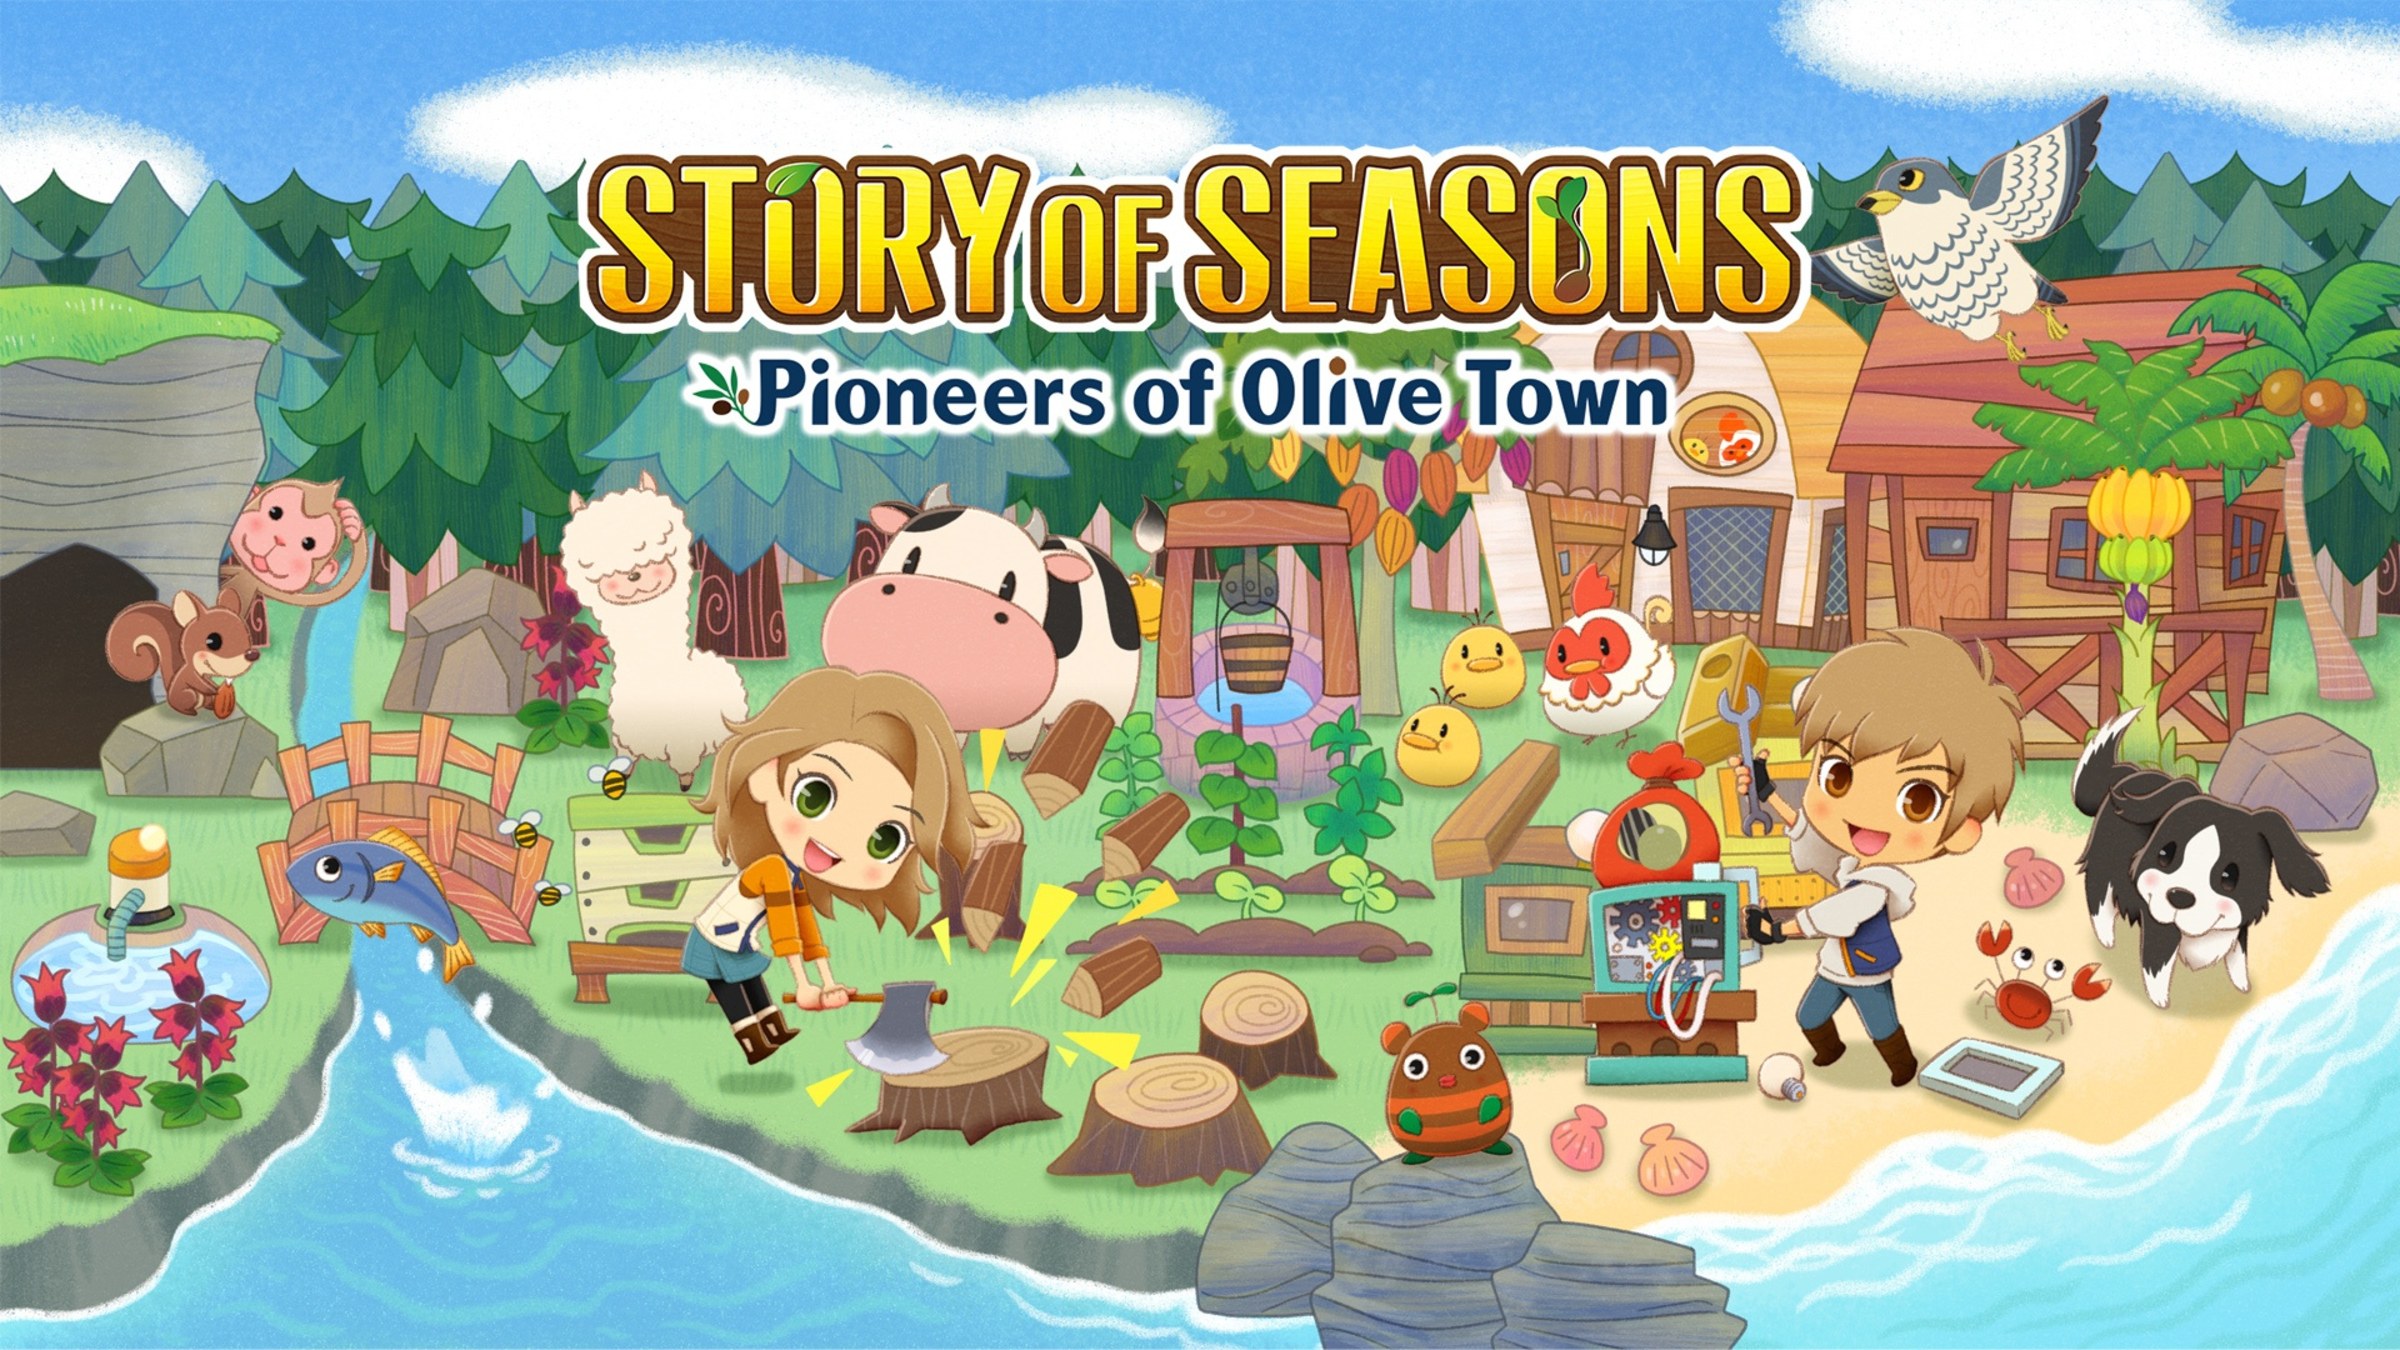 STORY OF SEASONS: Pioneers of Olive Town for Nintendo Switch - Nintendo  Official Site